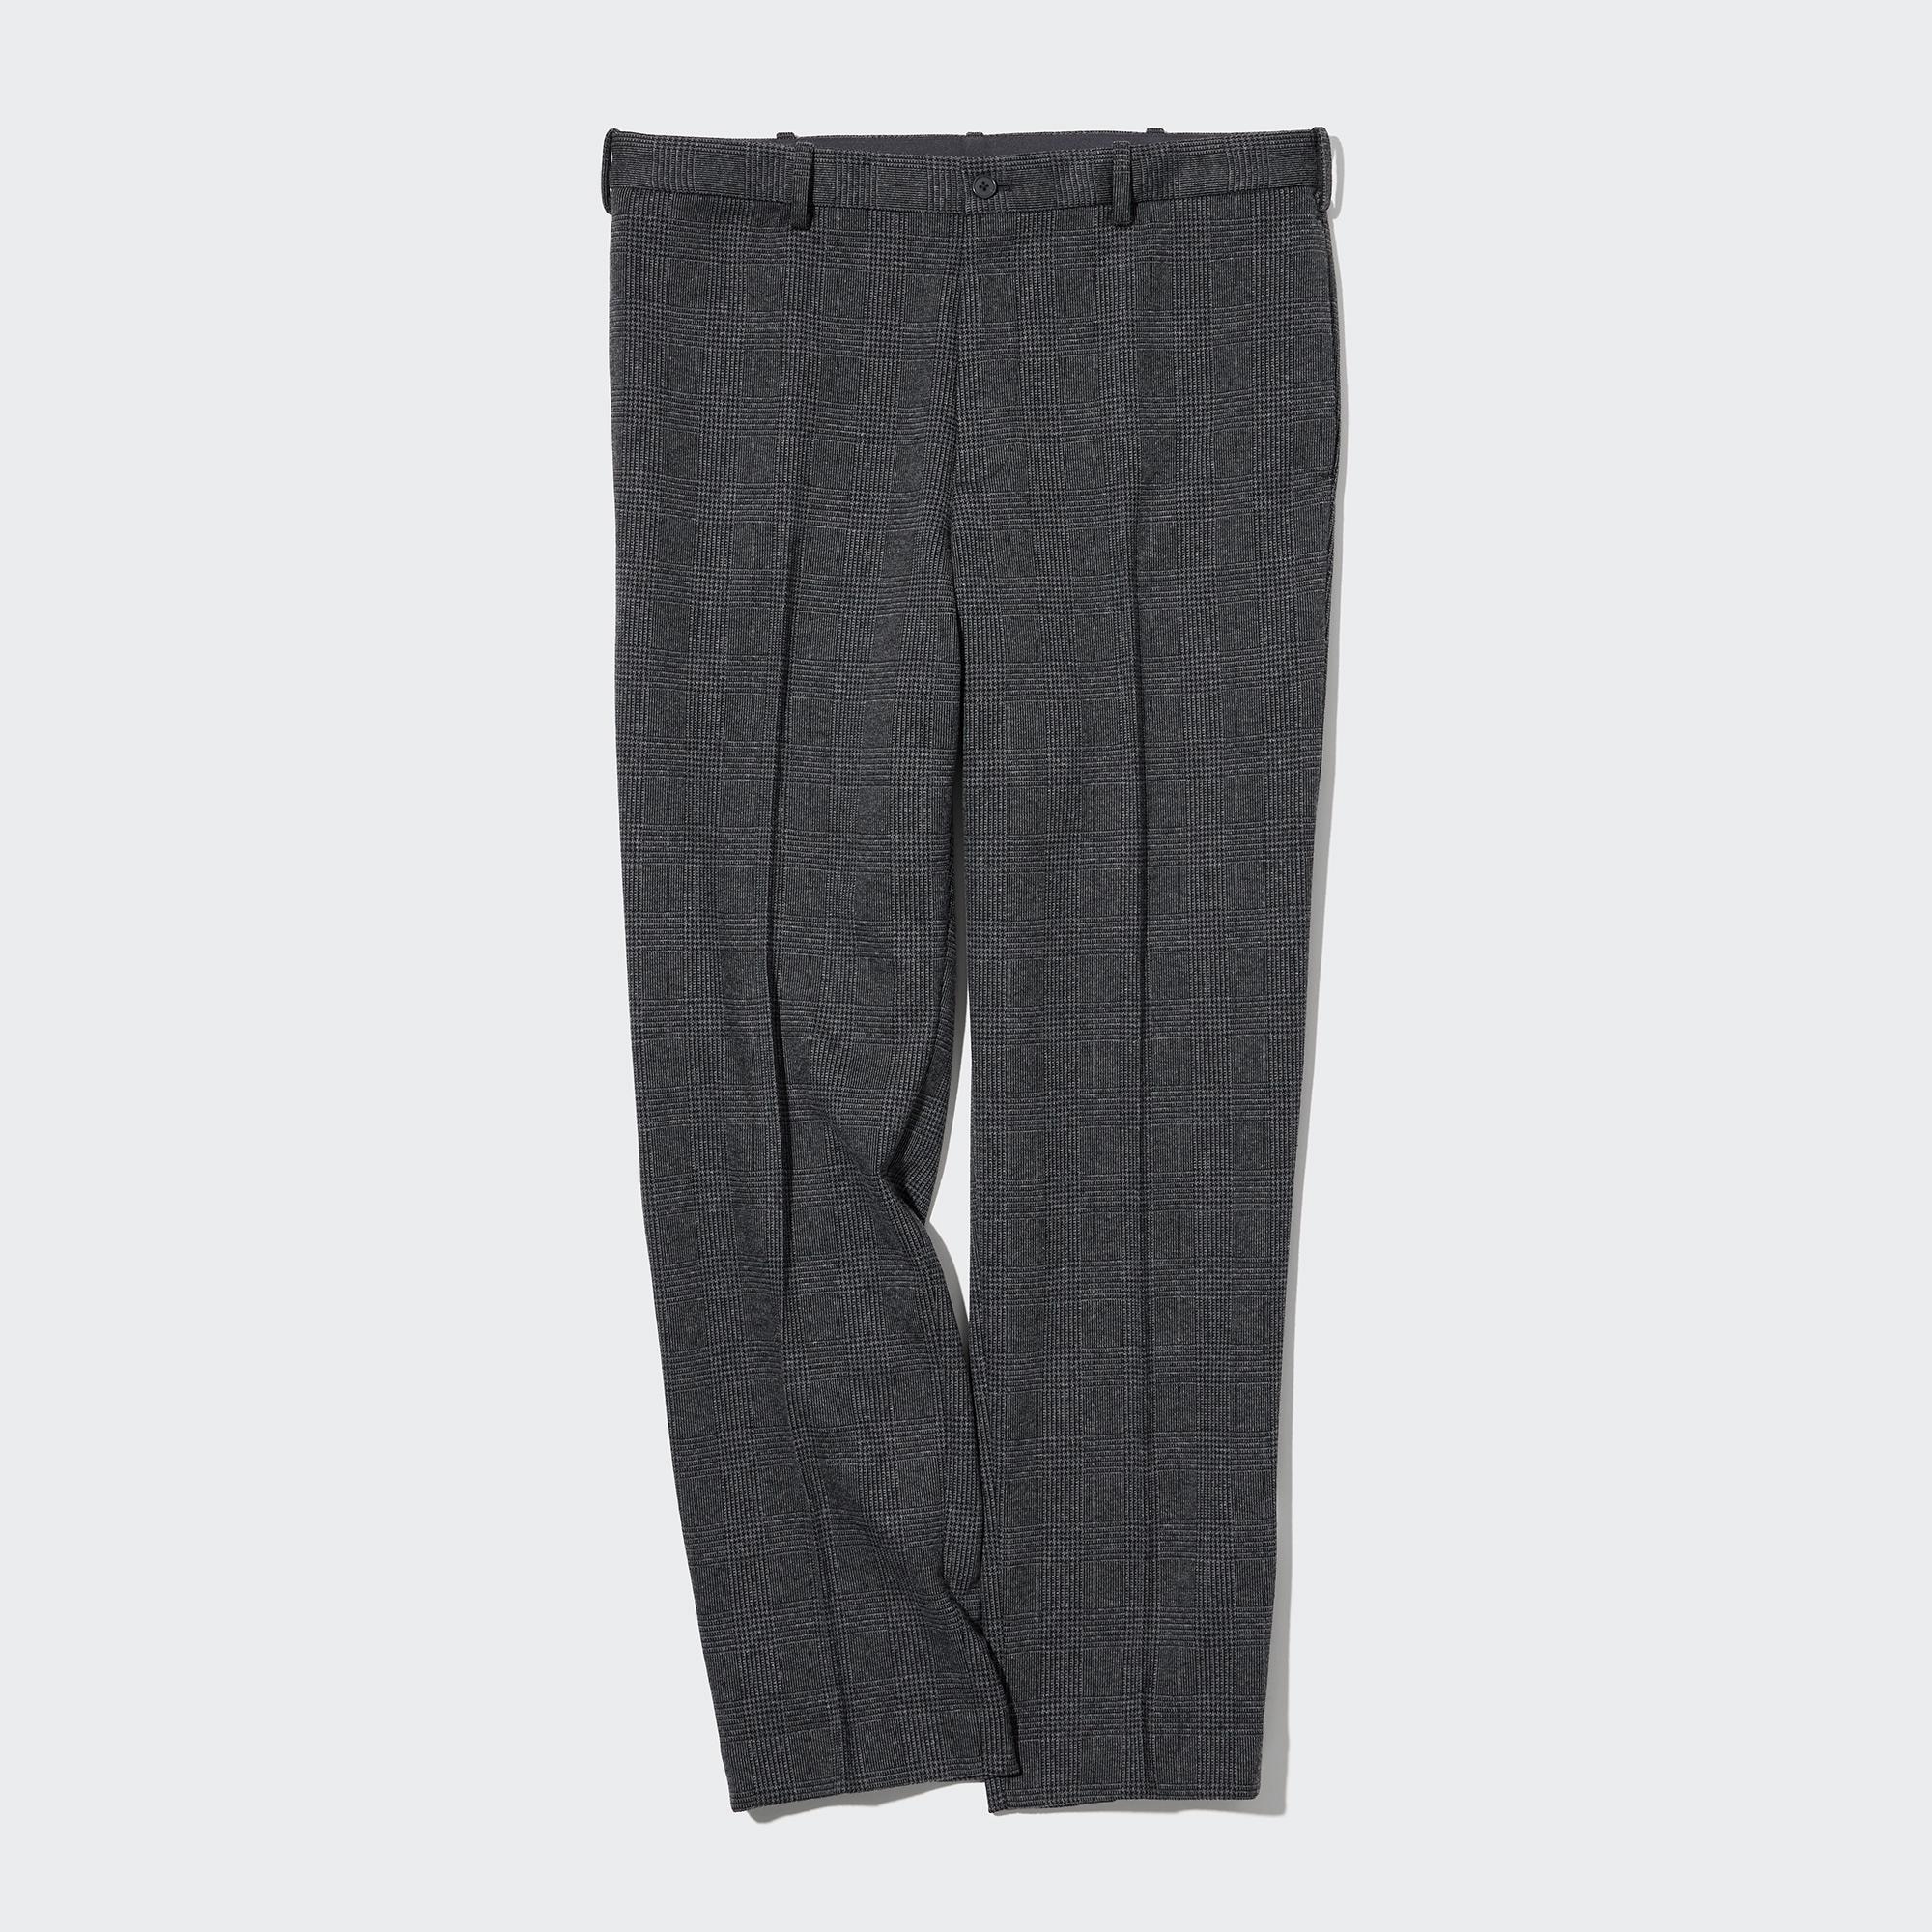 UNIQLO Smart Ankle Pants (2-Way Stretch Houndstooth)